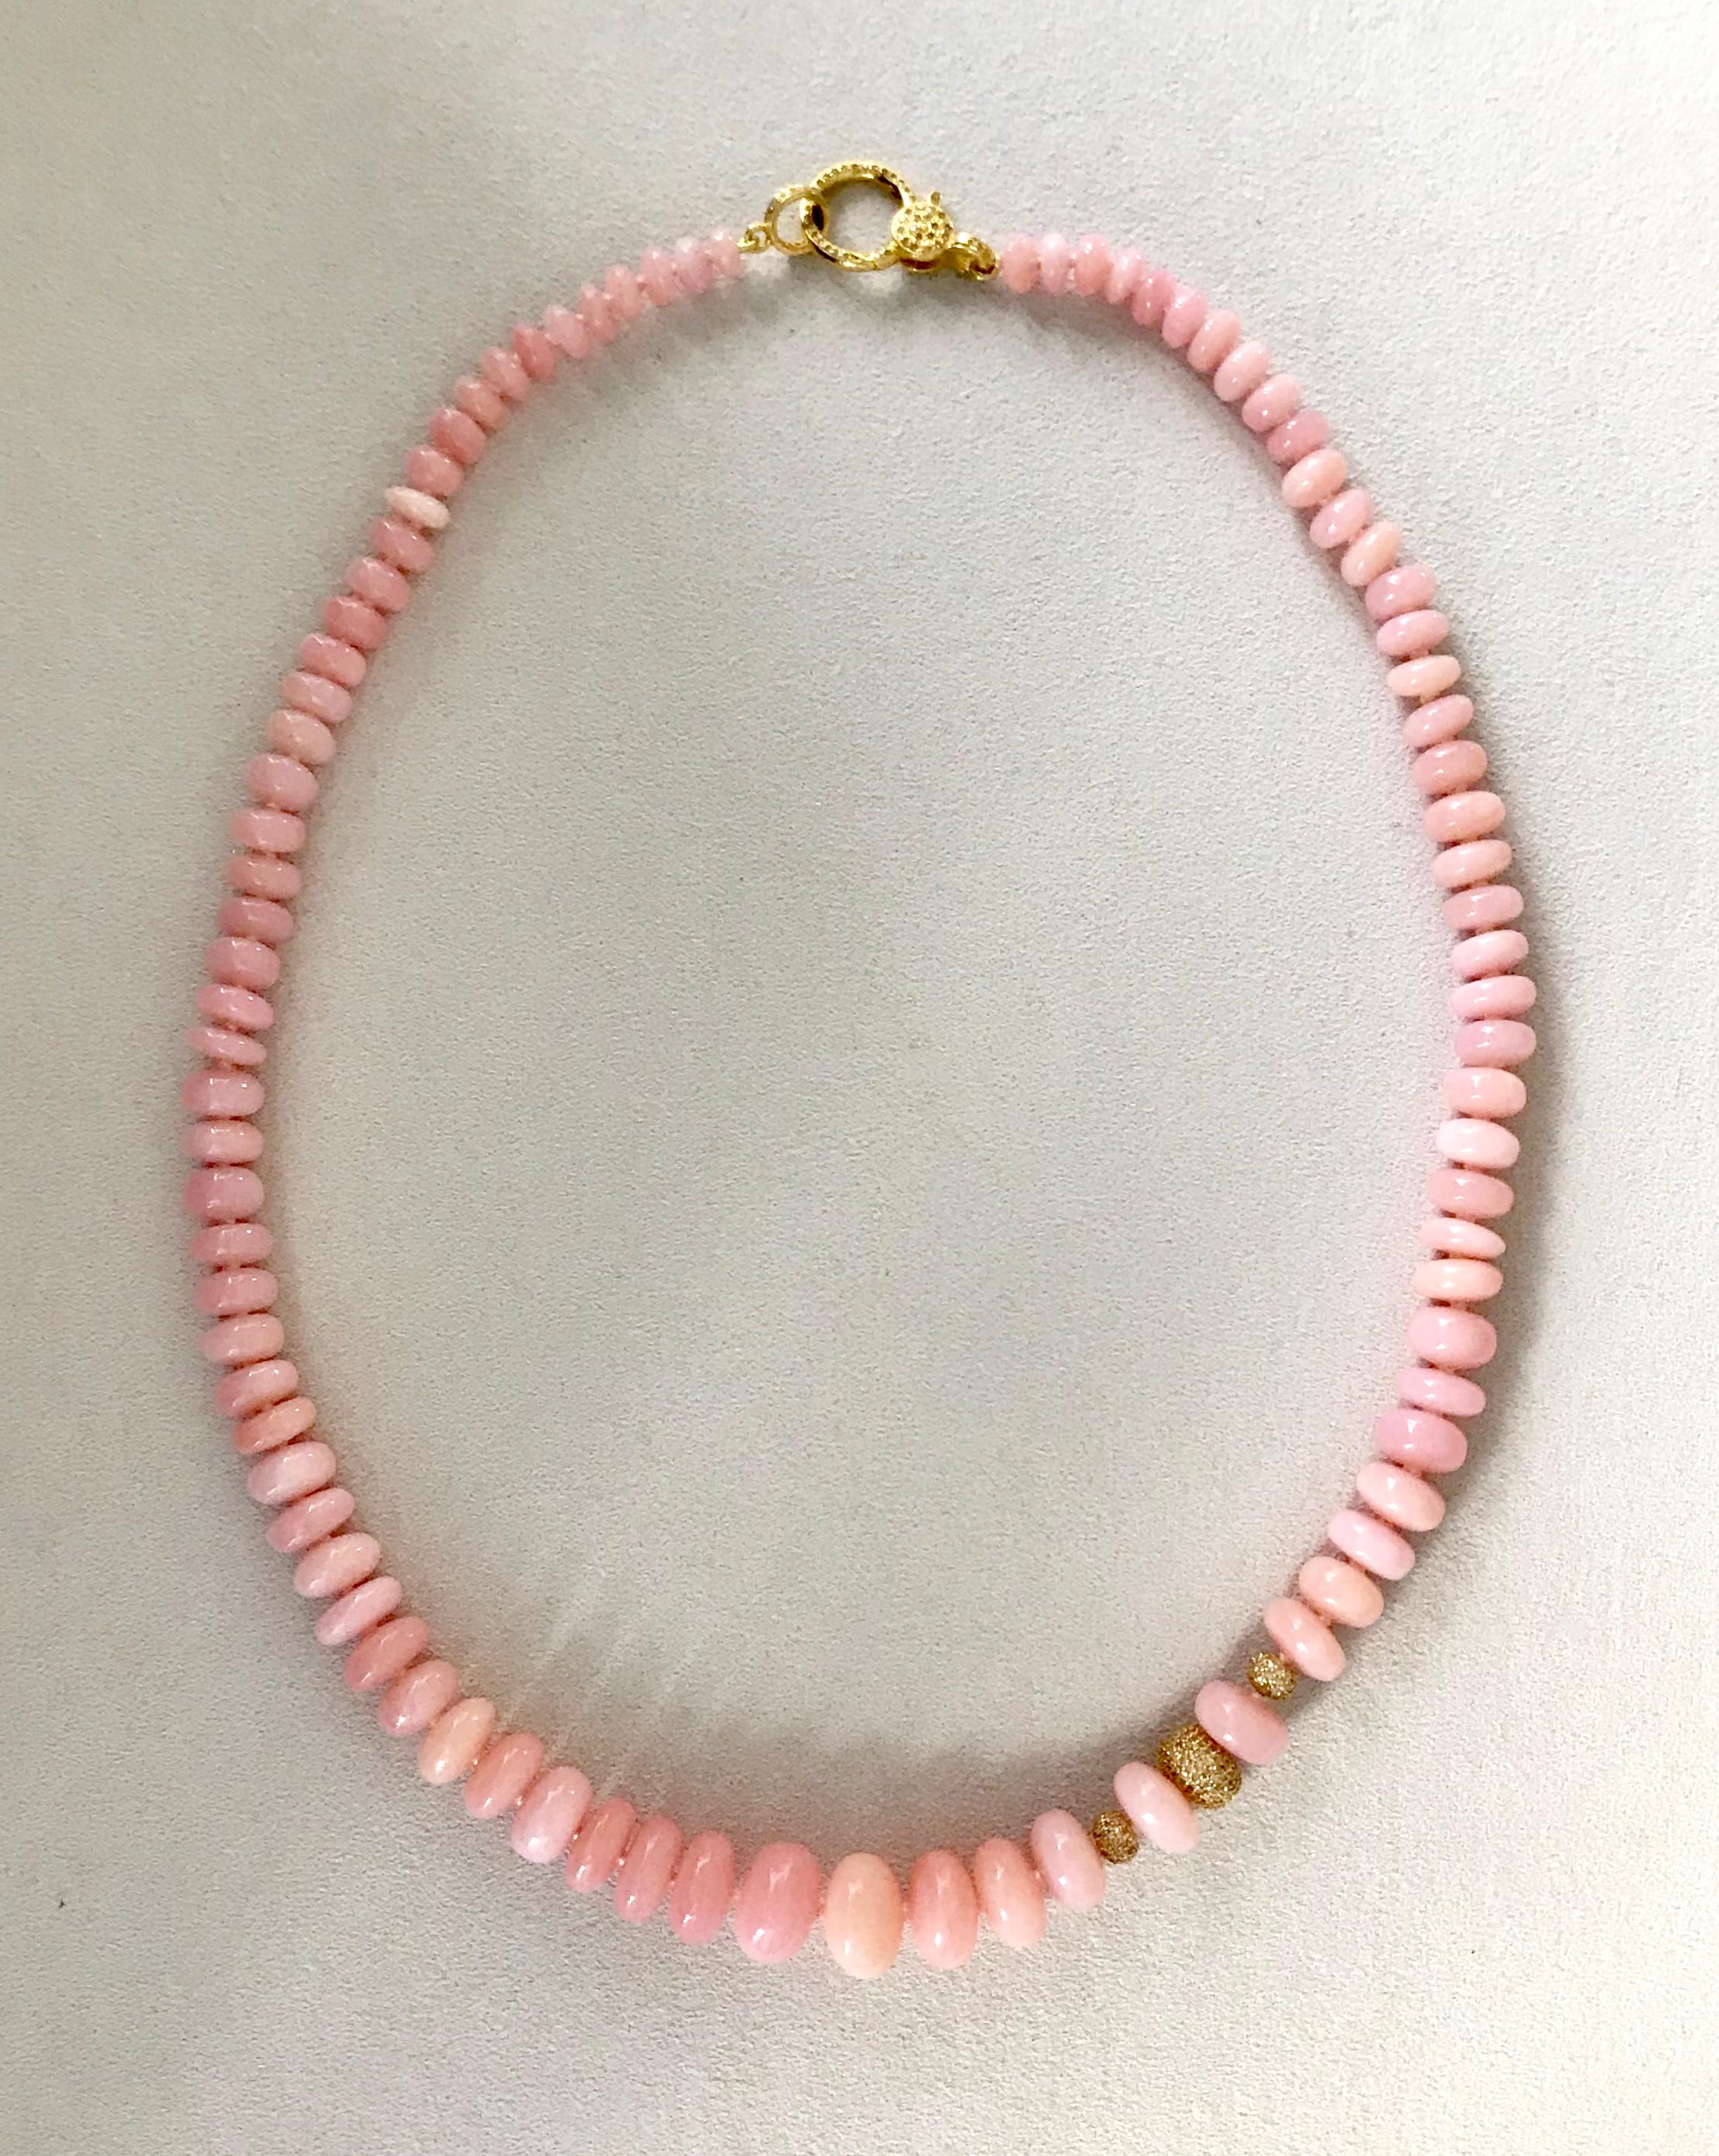  14 Karat Yellow Gold Pink Opal Beaded Necklace with Diamond Beads and Clasp 1